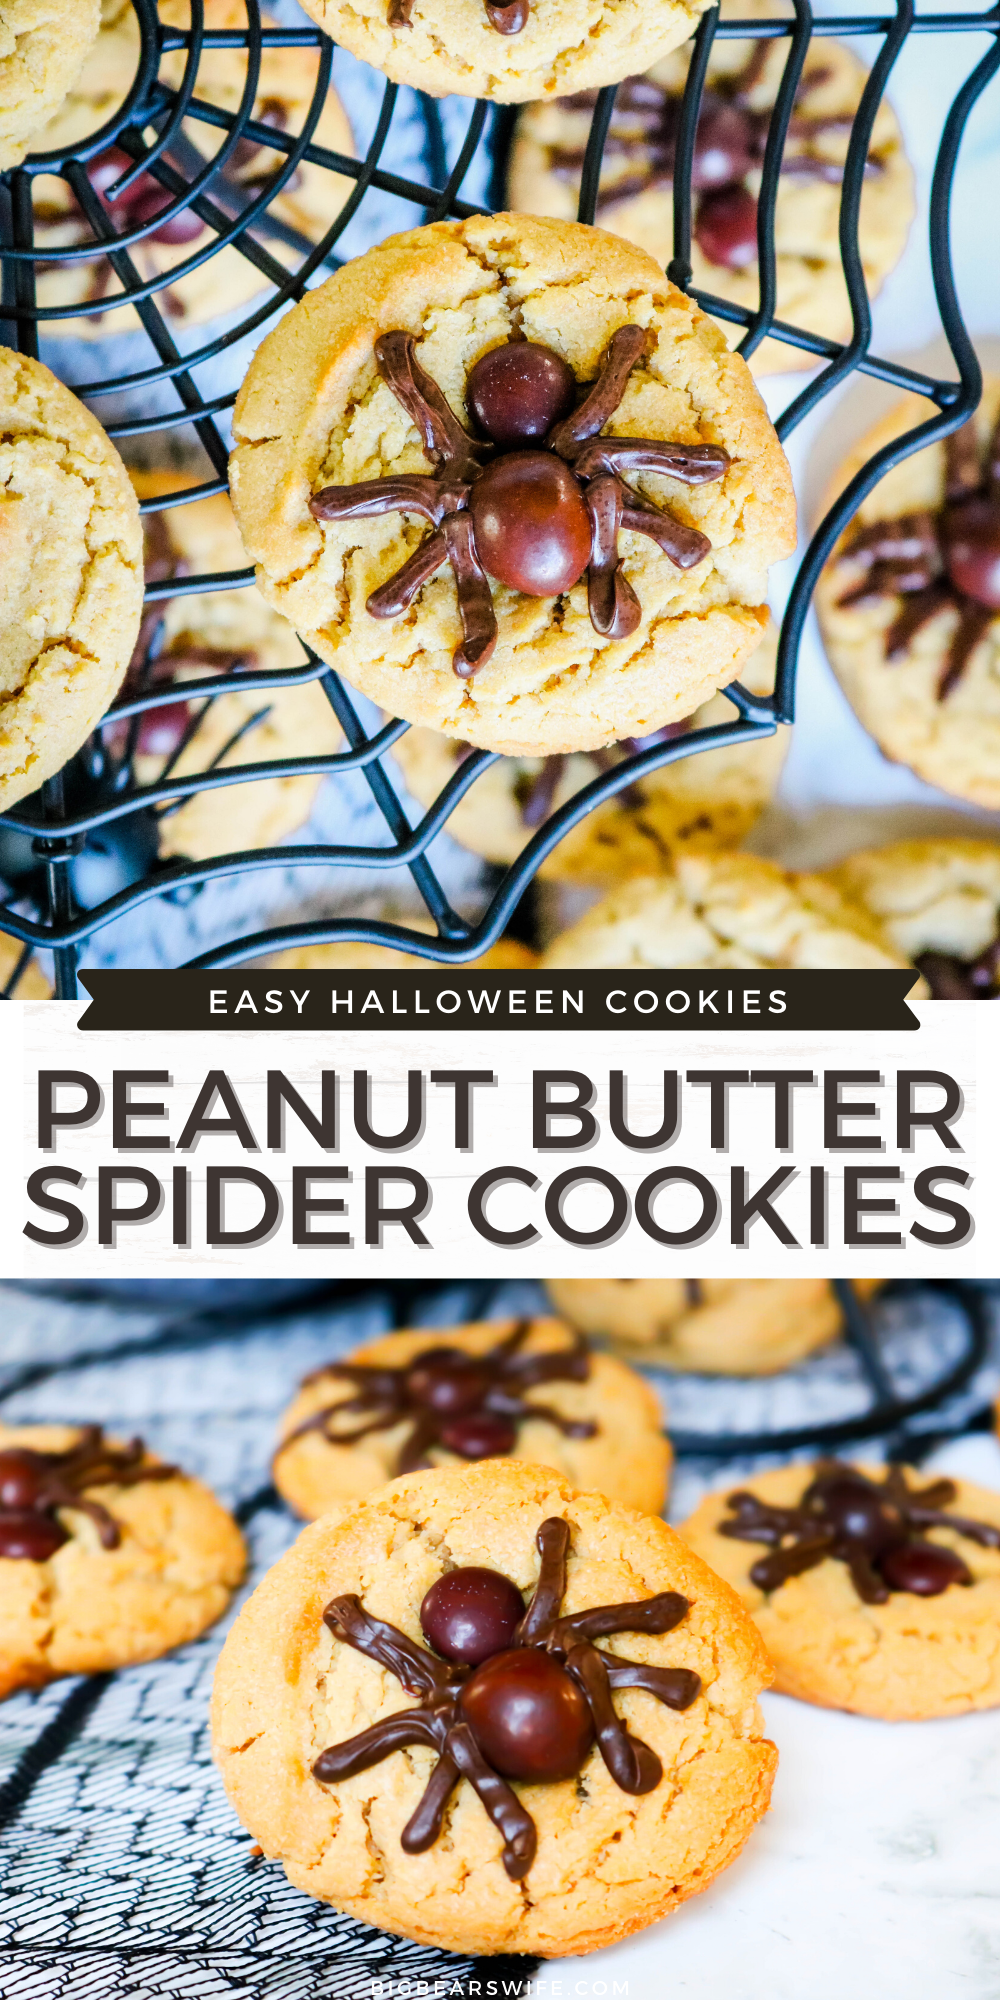 This Peanut Butter Spider Cookies recipe is an easy Halloween cookie recipe! These easy spider cookies are based on my favorite Peanut Butter Blossoms and the spiders are made with brown M&Ms and melted chocolate chips! If you need a cookie recipe for a Halloween Party Dessert or something fun to make with the kids for Halloween, these peanut butter spider cookies are perfect for both.  via @bigbearswife